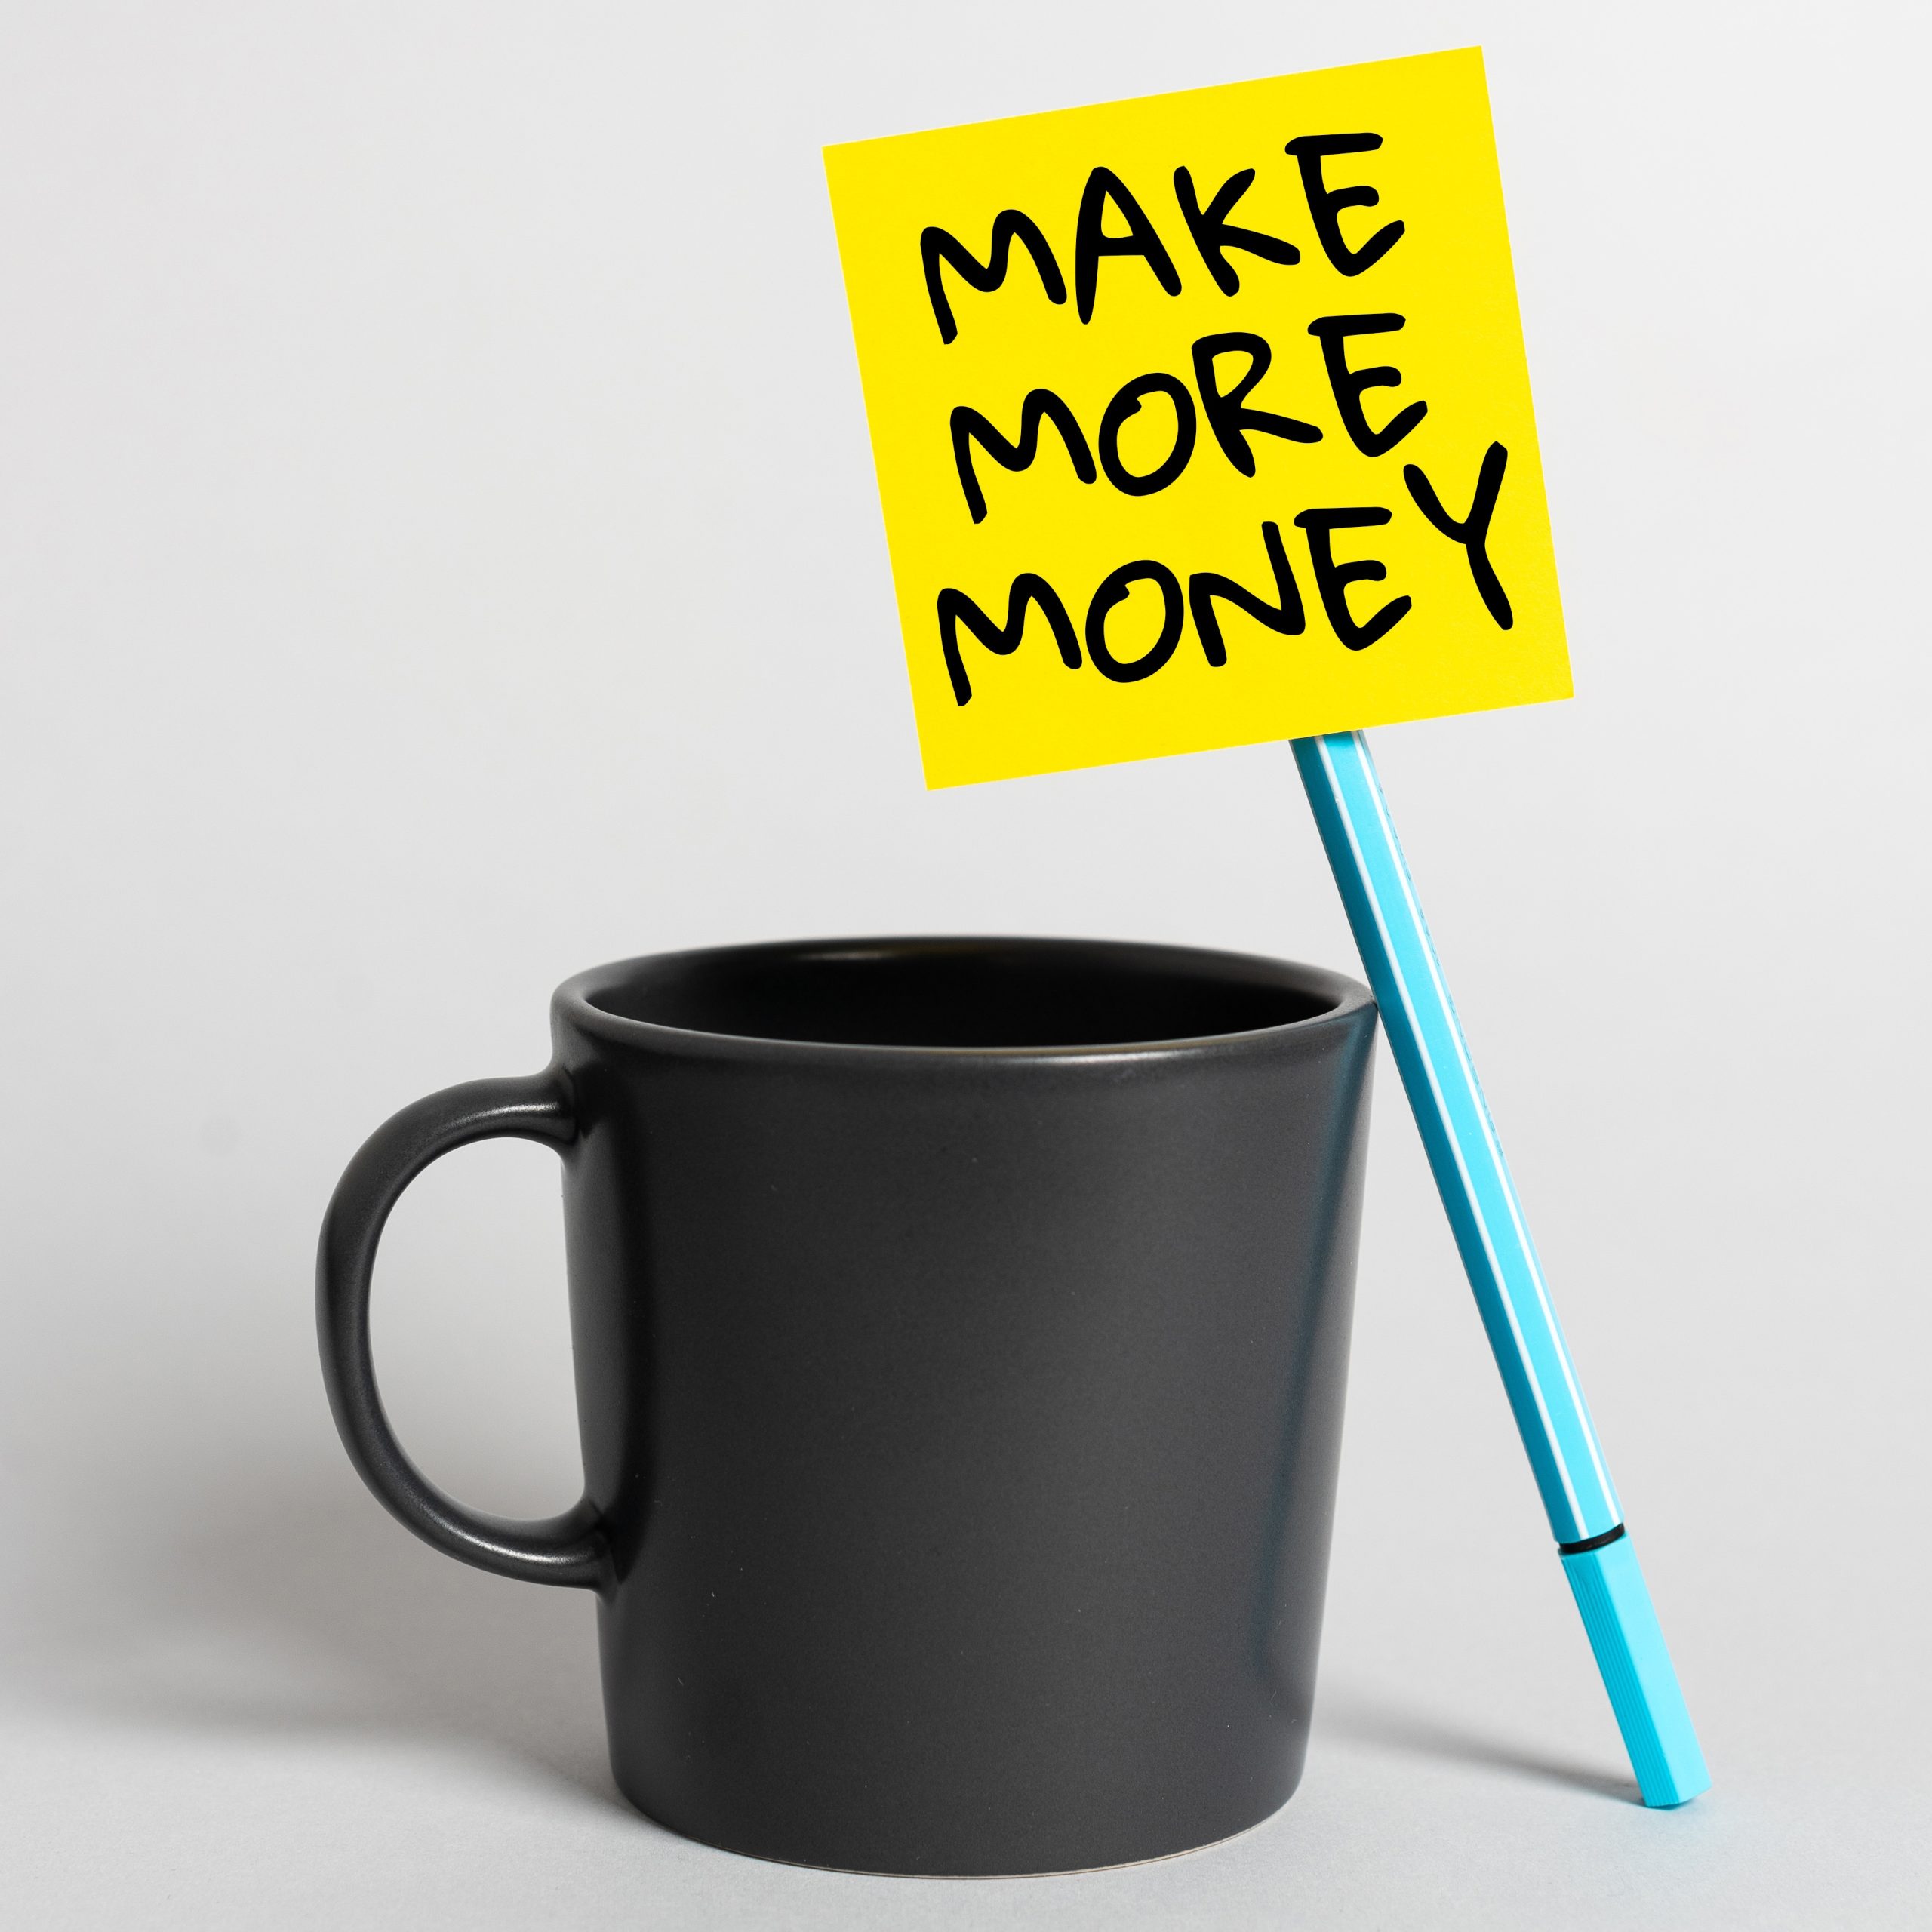 Image of a coffee cup with a pen and post-it note that says Make More Money